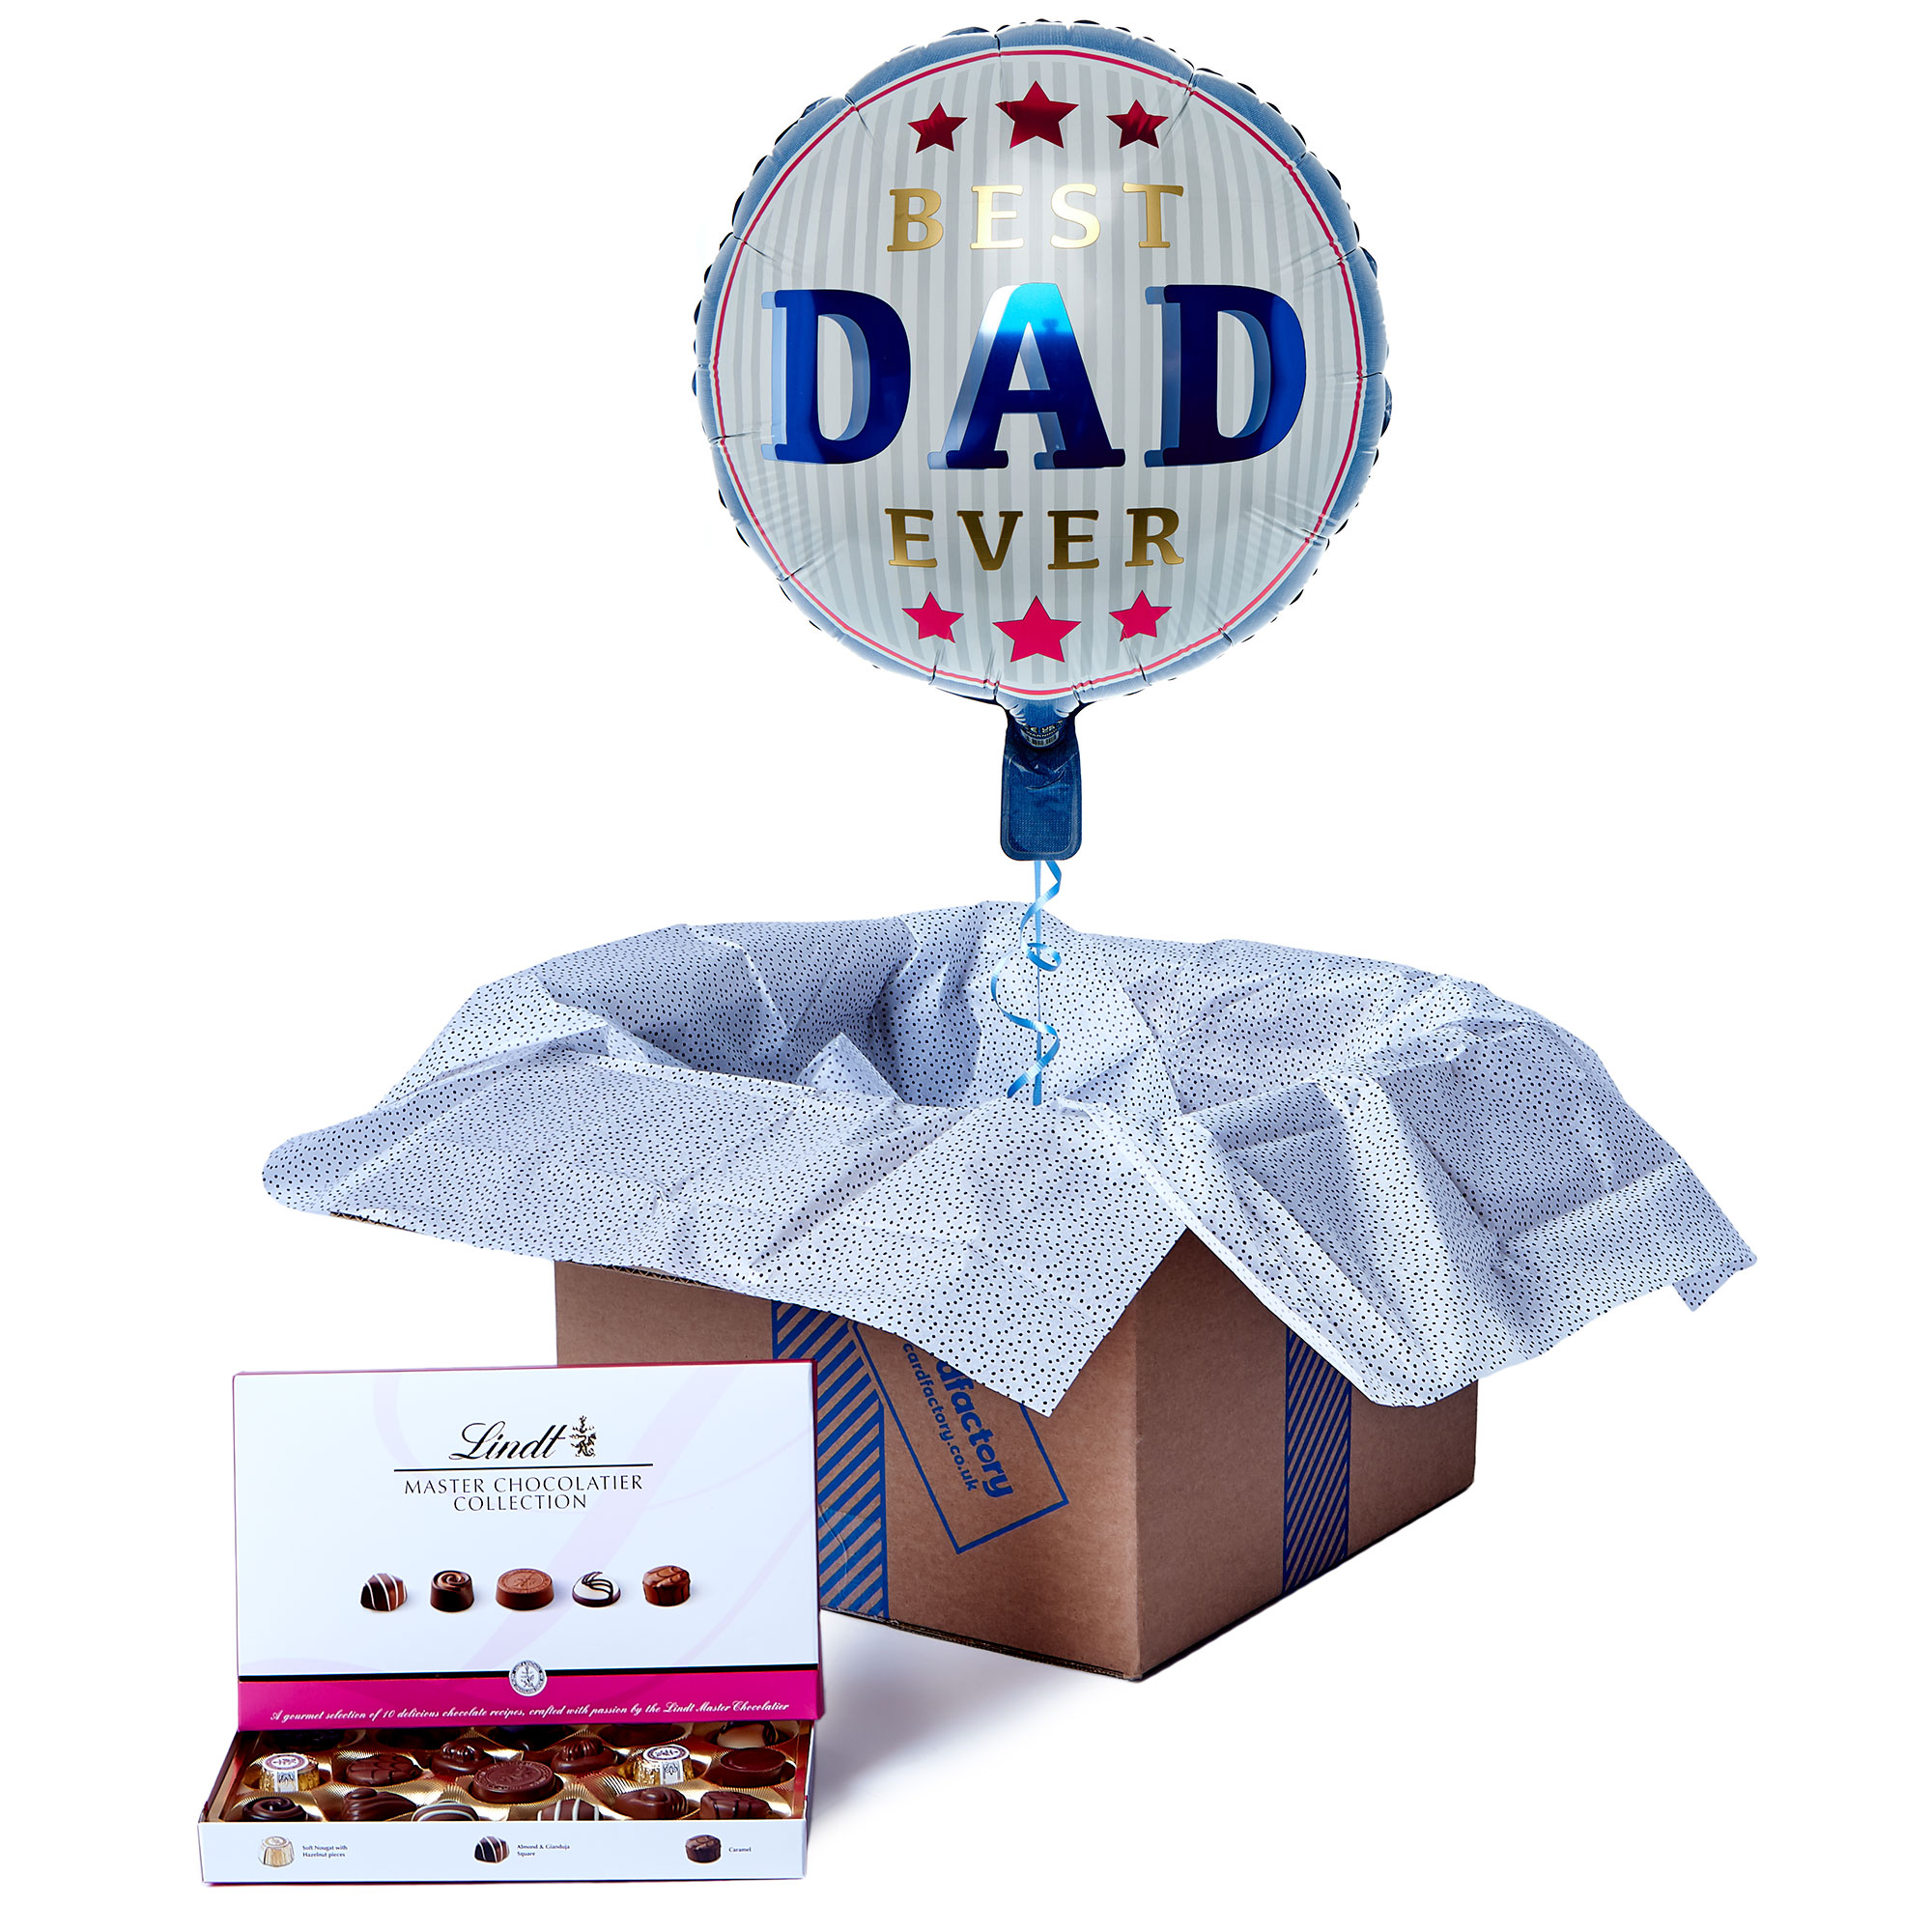 Best Dad Ever Balloon & Lindt Chocolate Box - FREE GIFT CARD!